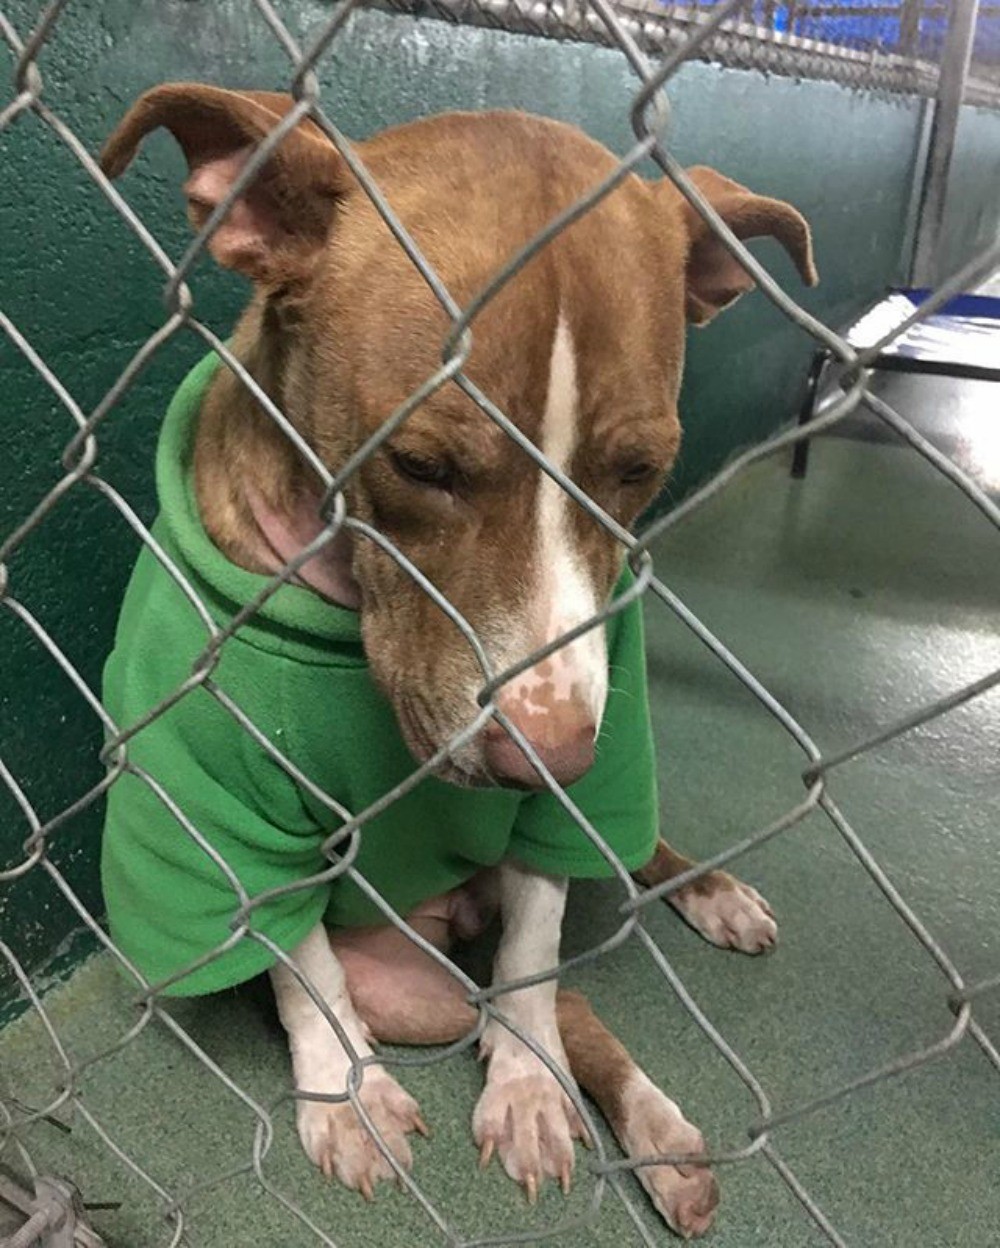 2-months later and heartbroken shelter dog still wears his Christmas sweater